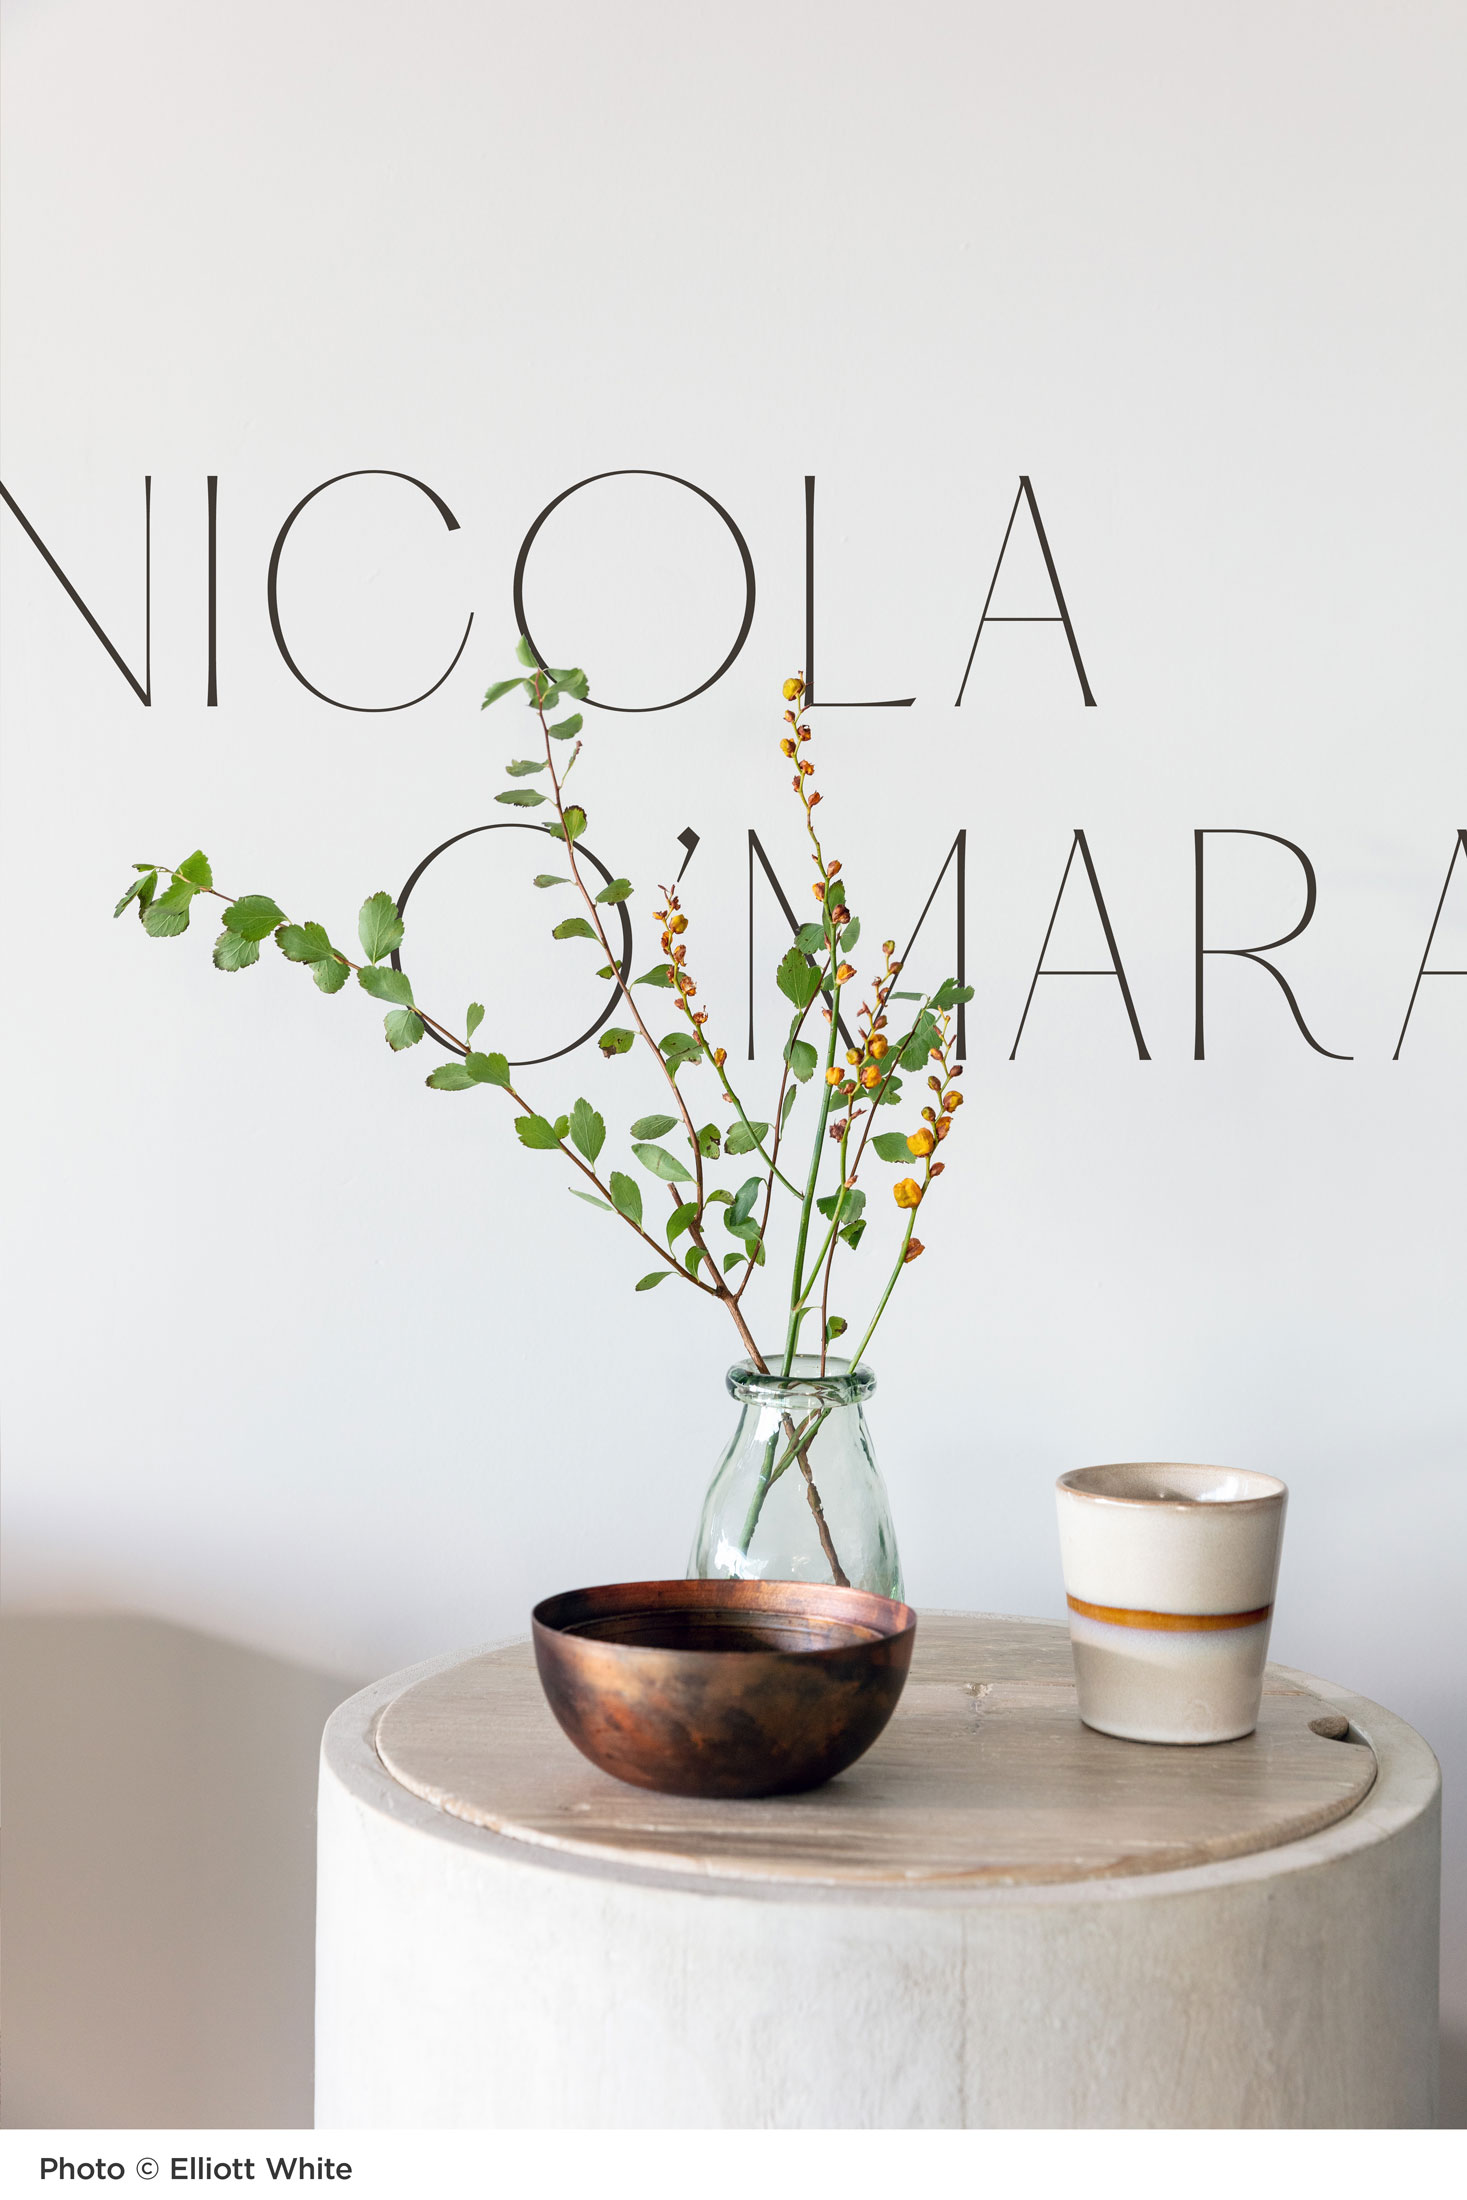 postcard design for Nicola O'Mara Interior Design featuring a round occasional table with plant and wooden bowl